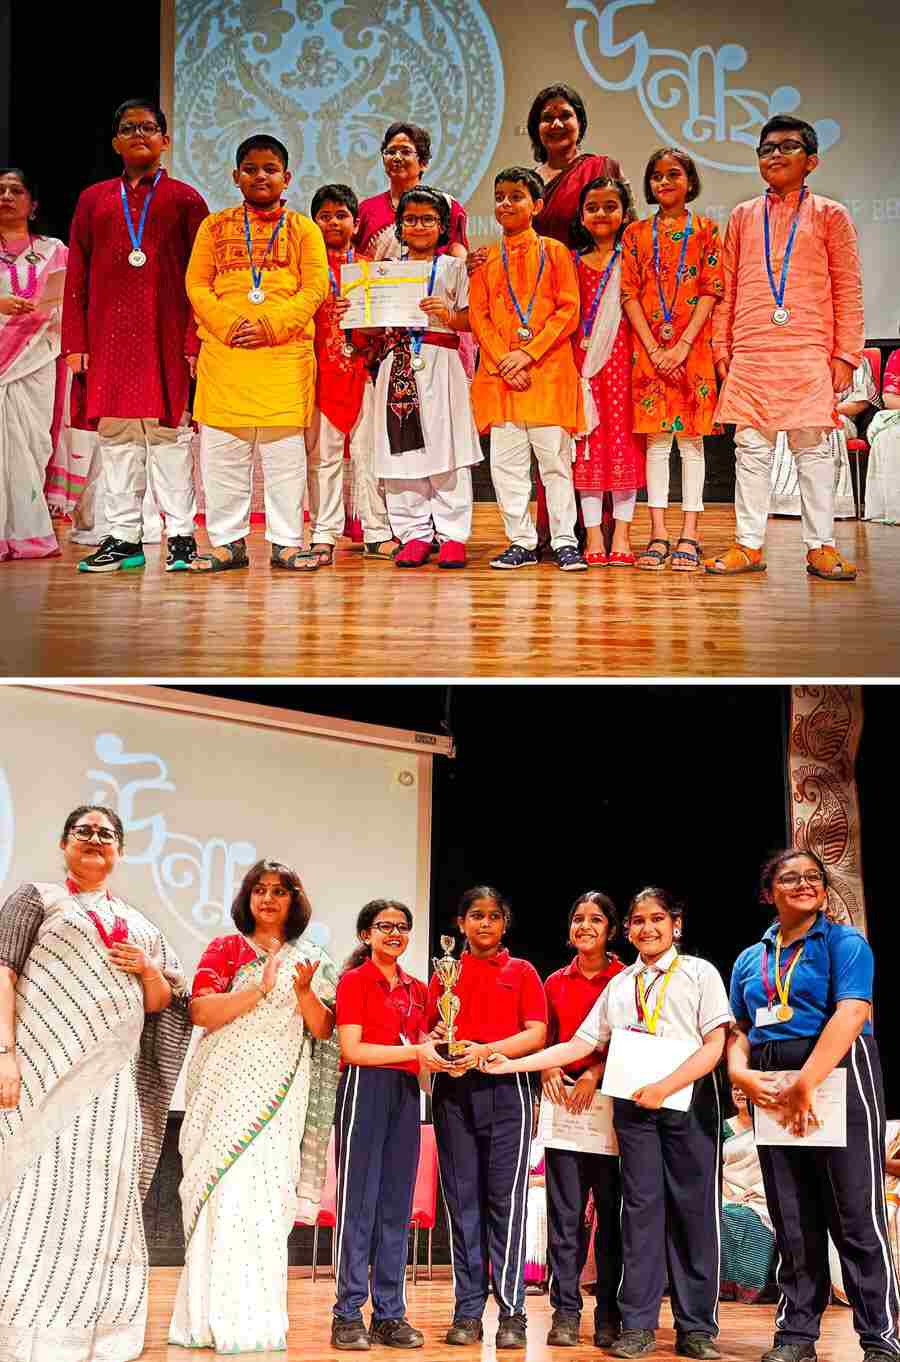 At the end of a fun-filled day, Indus Valley World School was declared the overall champion. Being the host school, they handed over the trophy to the Runners-up - Garden High School. Prisha Moitra, a student of Grade 7, IVWS, shared her personal highlights of the fest and said, “I took part in the fest as one of the dancers. All the schools mesmerised the audience with their elegant, bold performances. When our group went up on stage, we felt nothing but the thrill of dancing.”